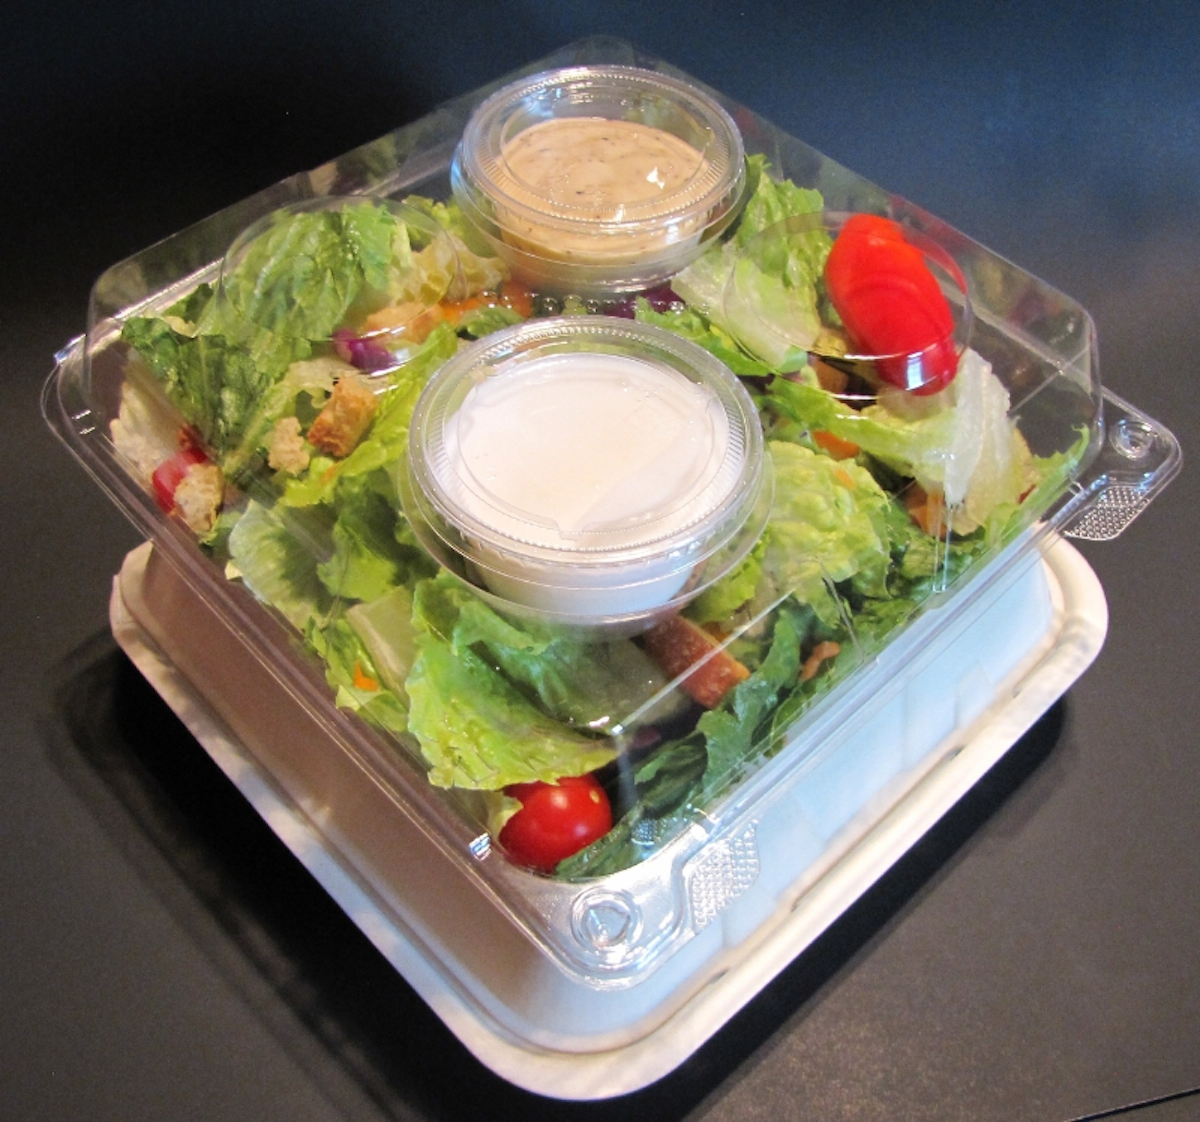 Go To Containers Hygienic Takeout Food Trays Profood World